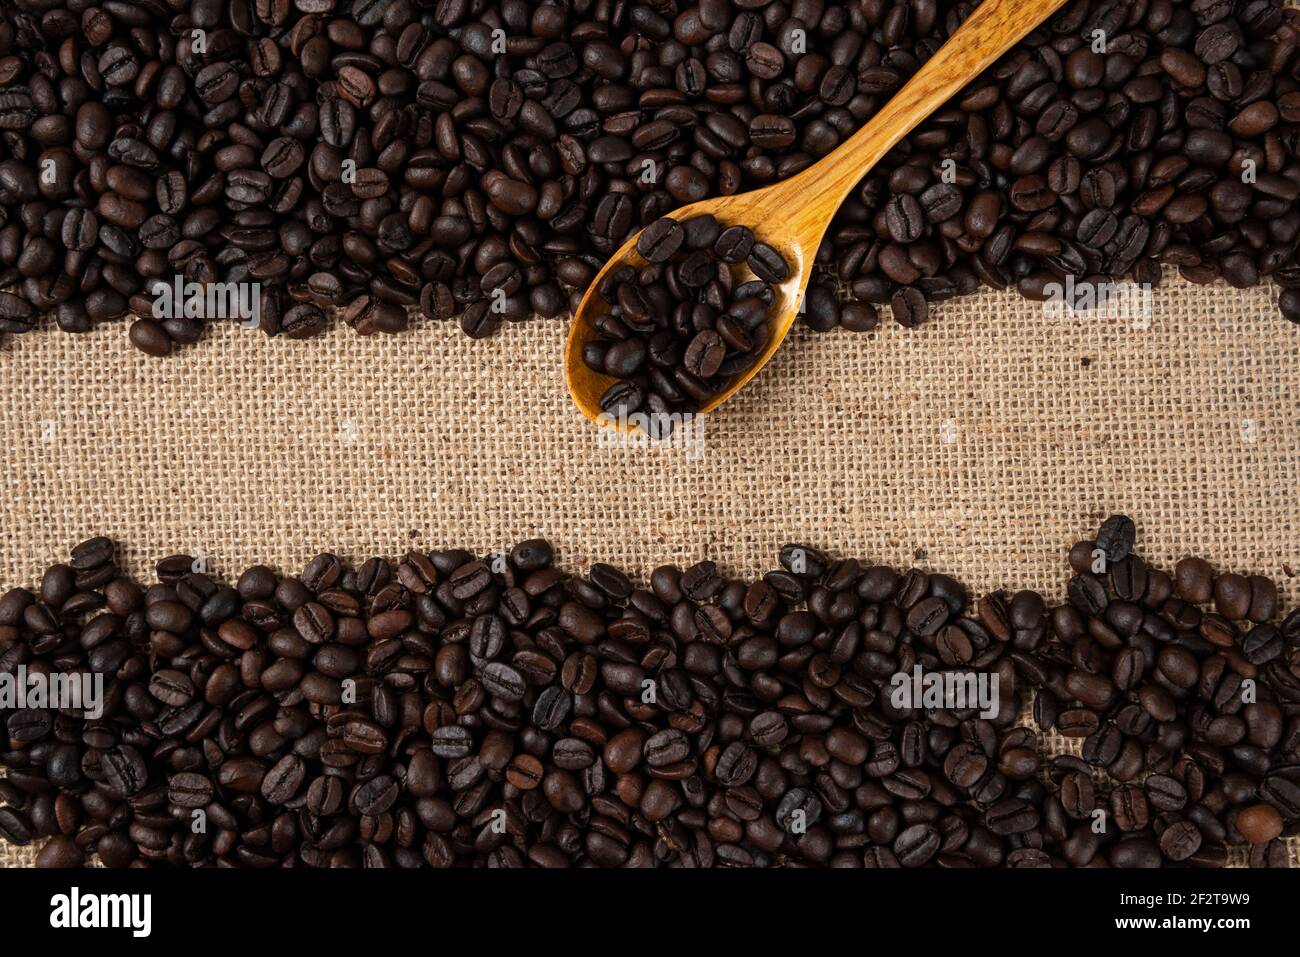 Pile of medium roasted coffee beans with wooden spoon scattered on burlap Stock Photo